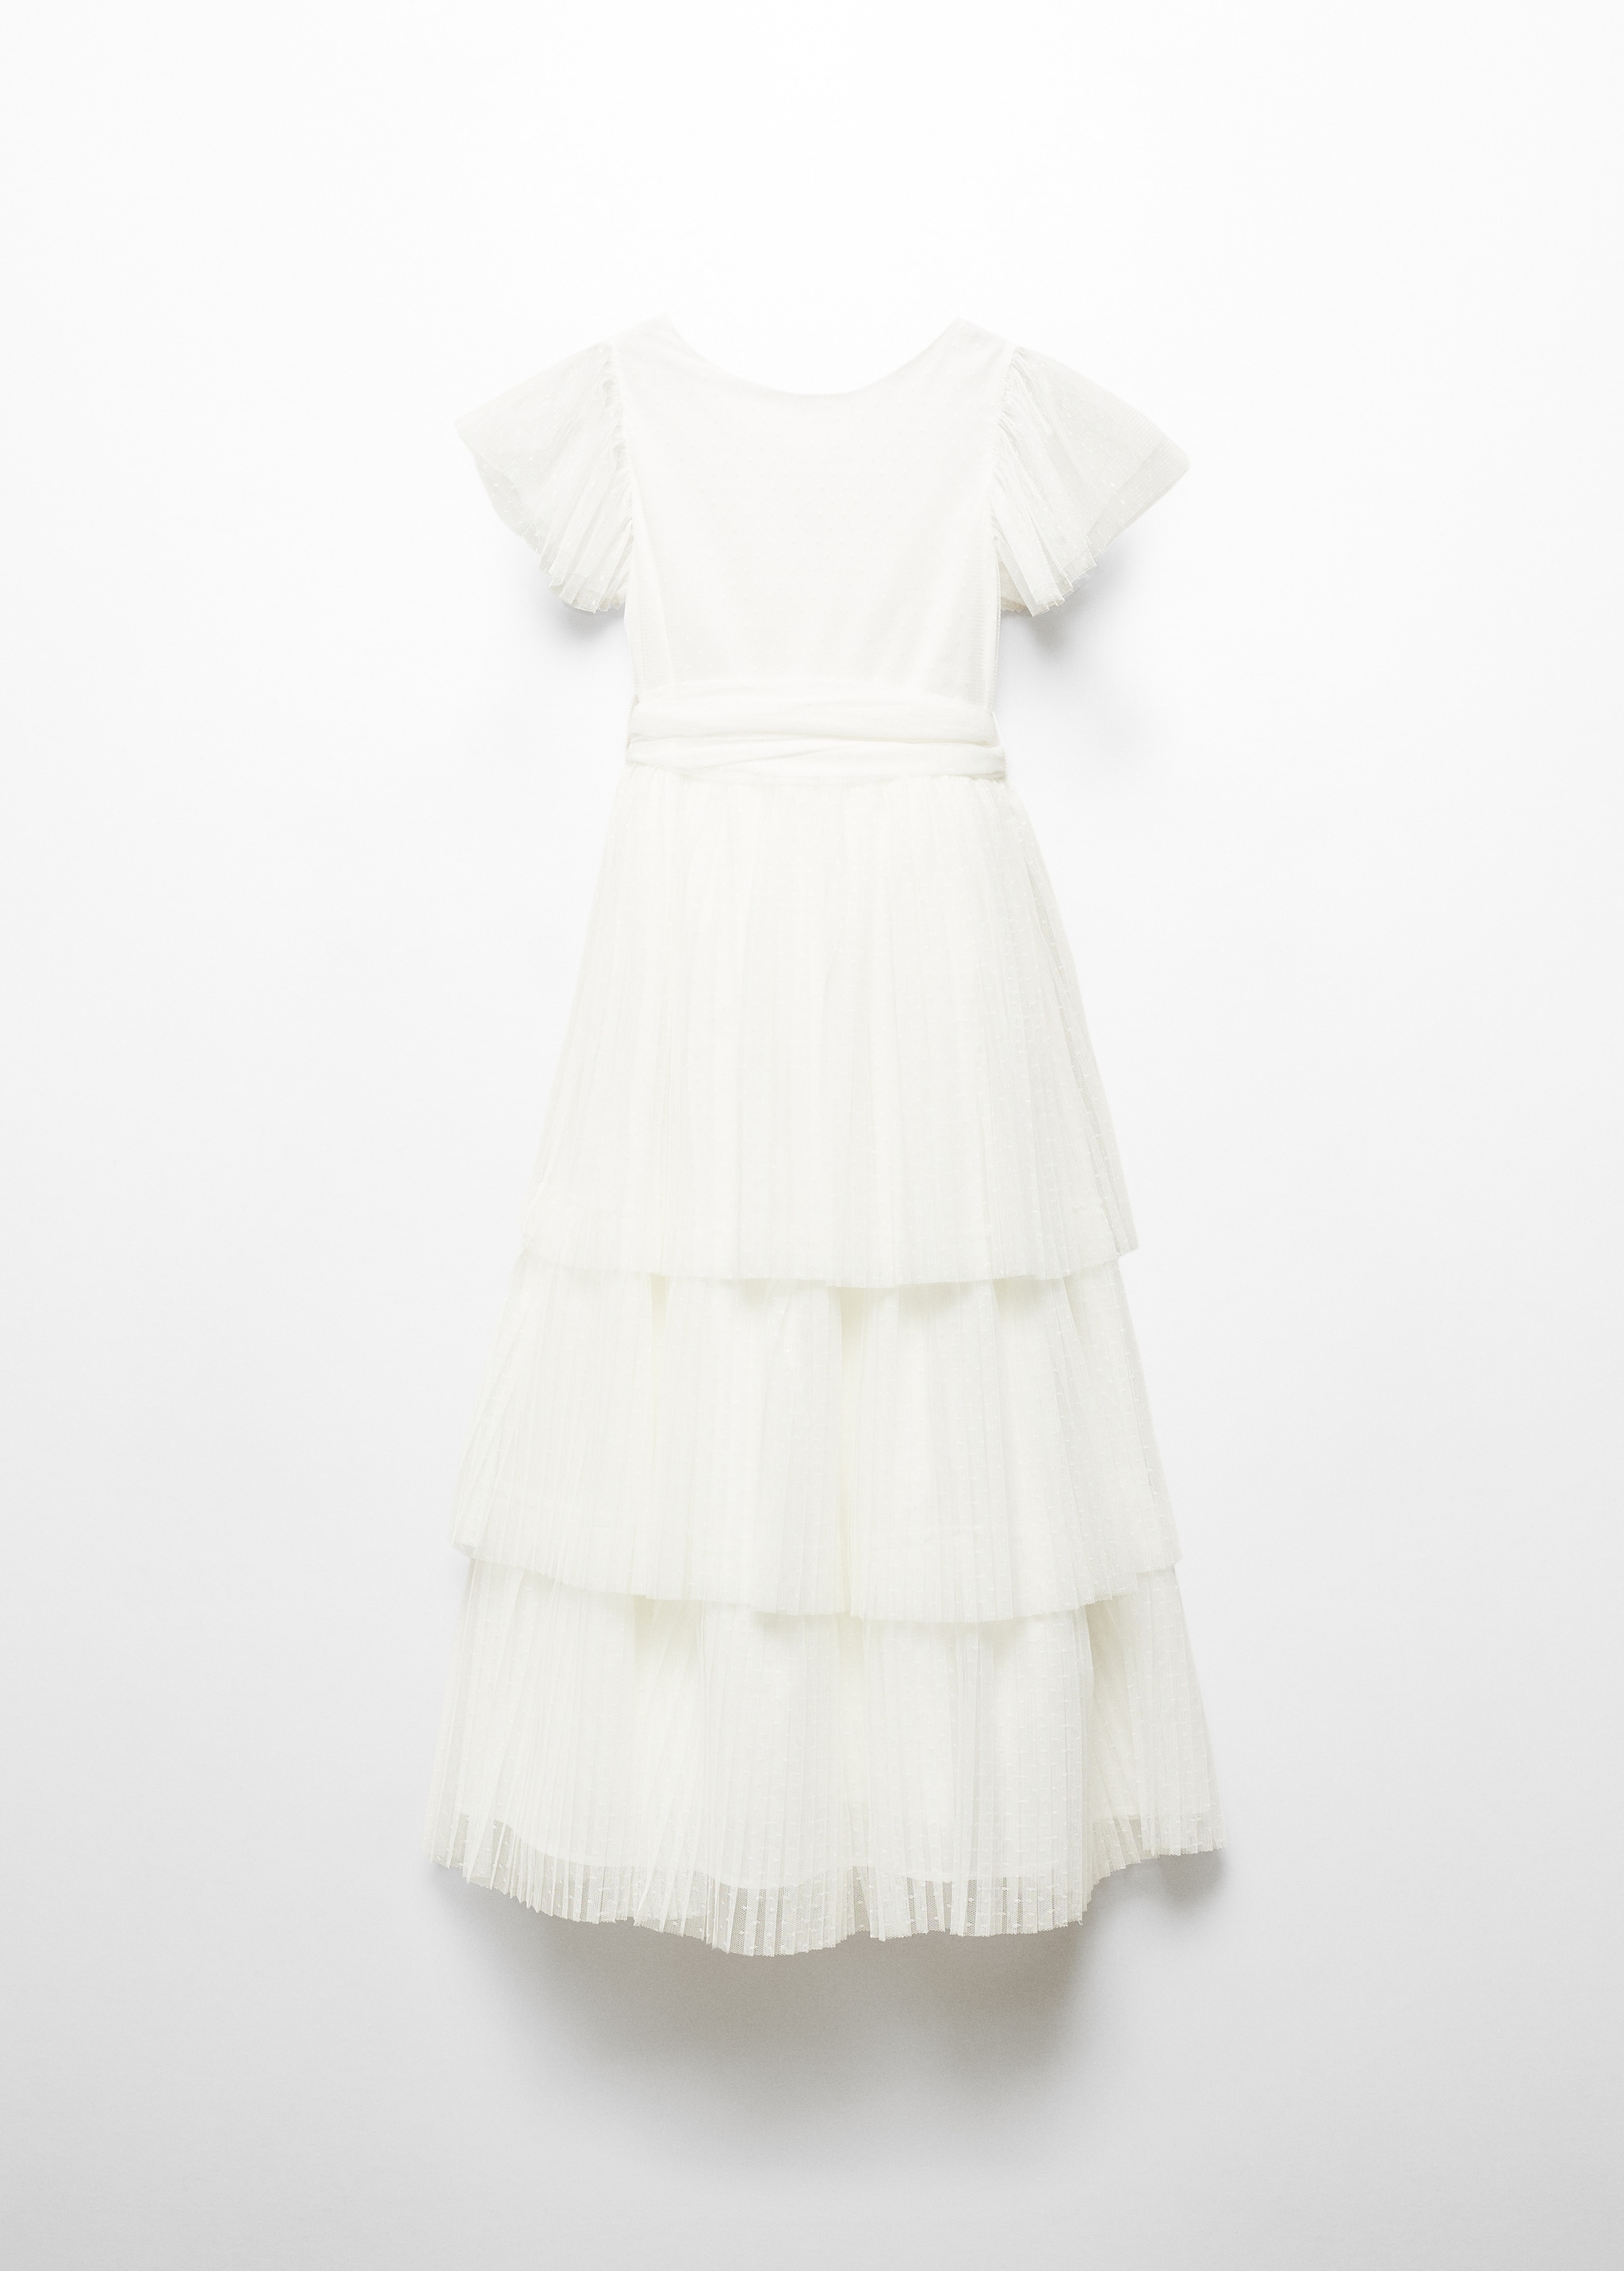 Ruffled tulle dress - Article without model